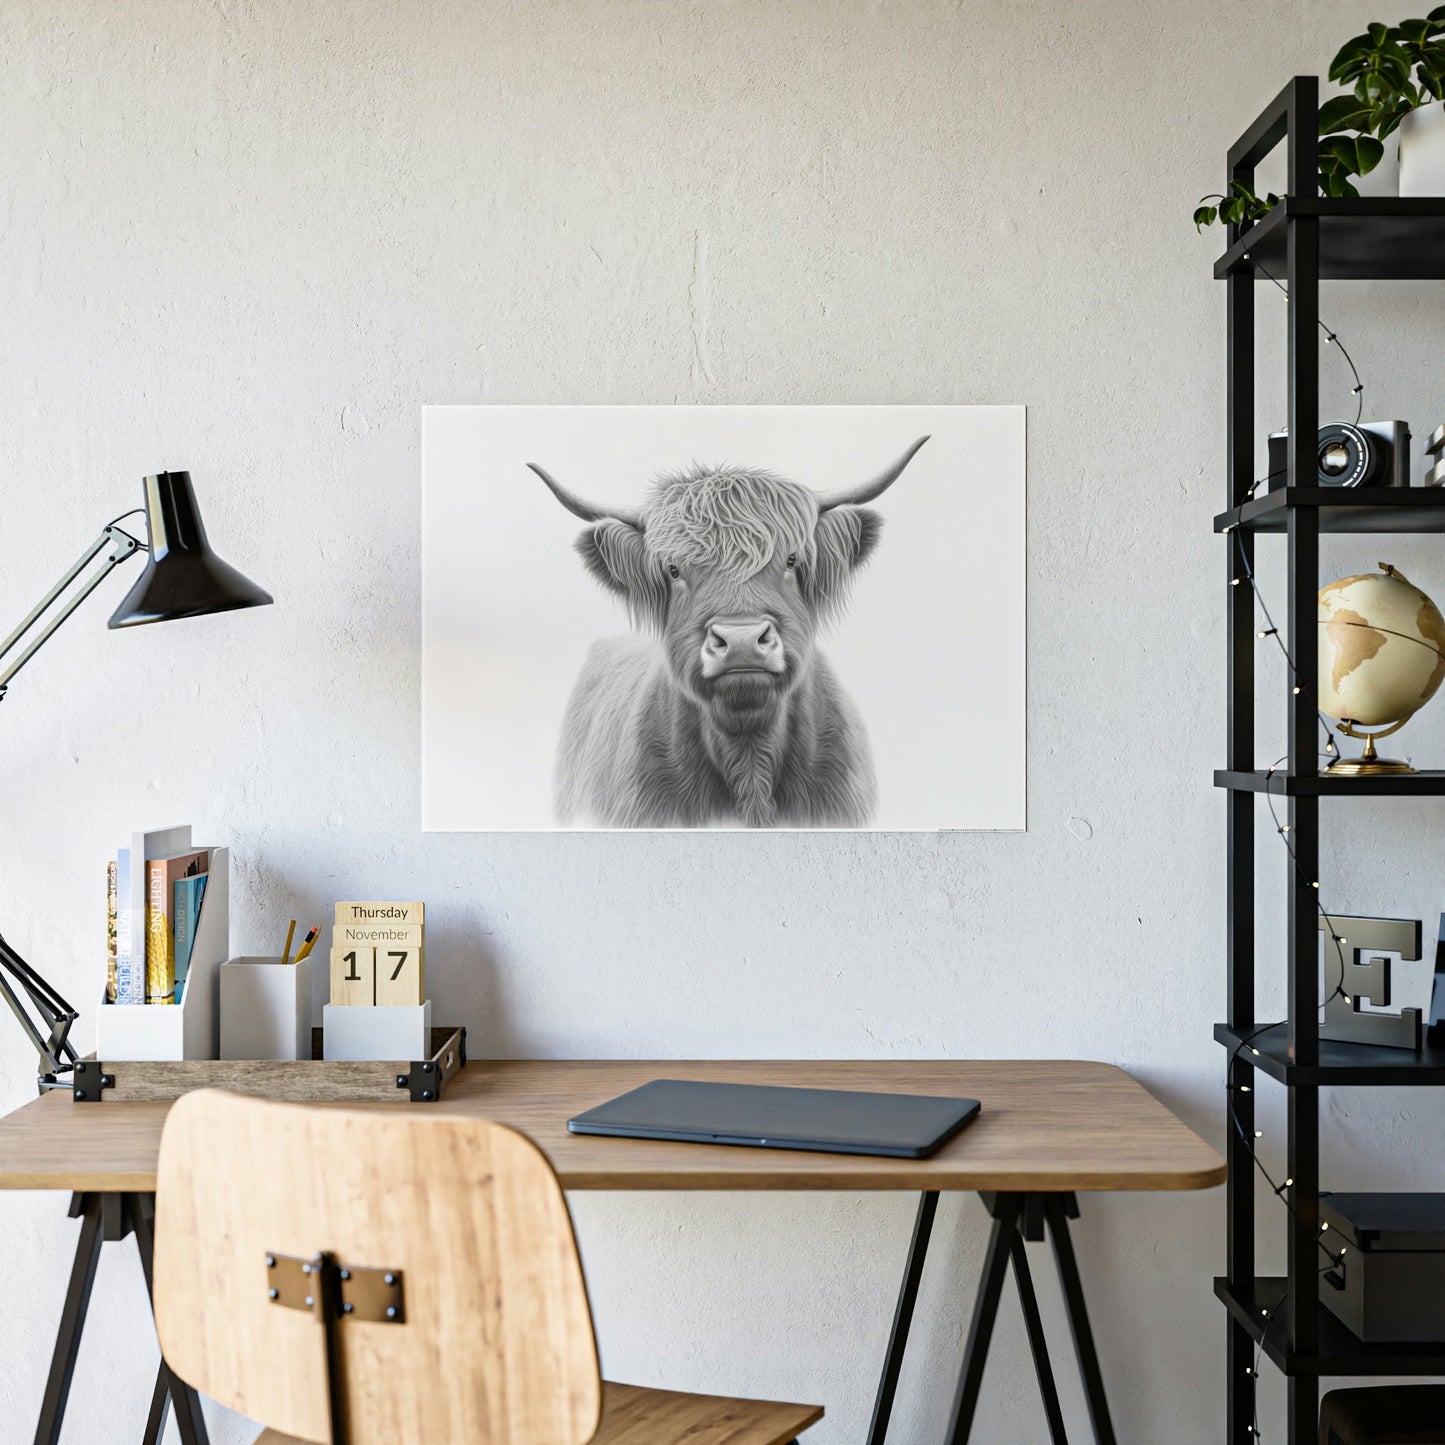 Artistic Whimsy: Framed Poster Wall Art Featuring a Playful Cow Portrait on Canvas